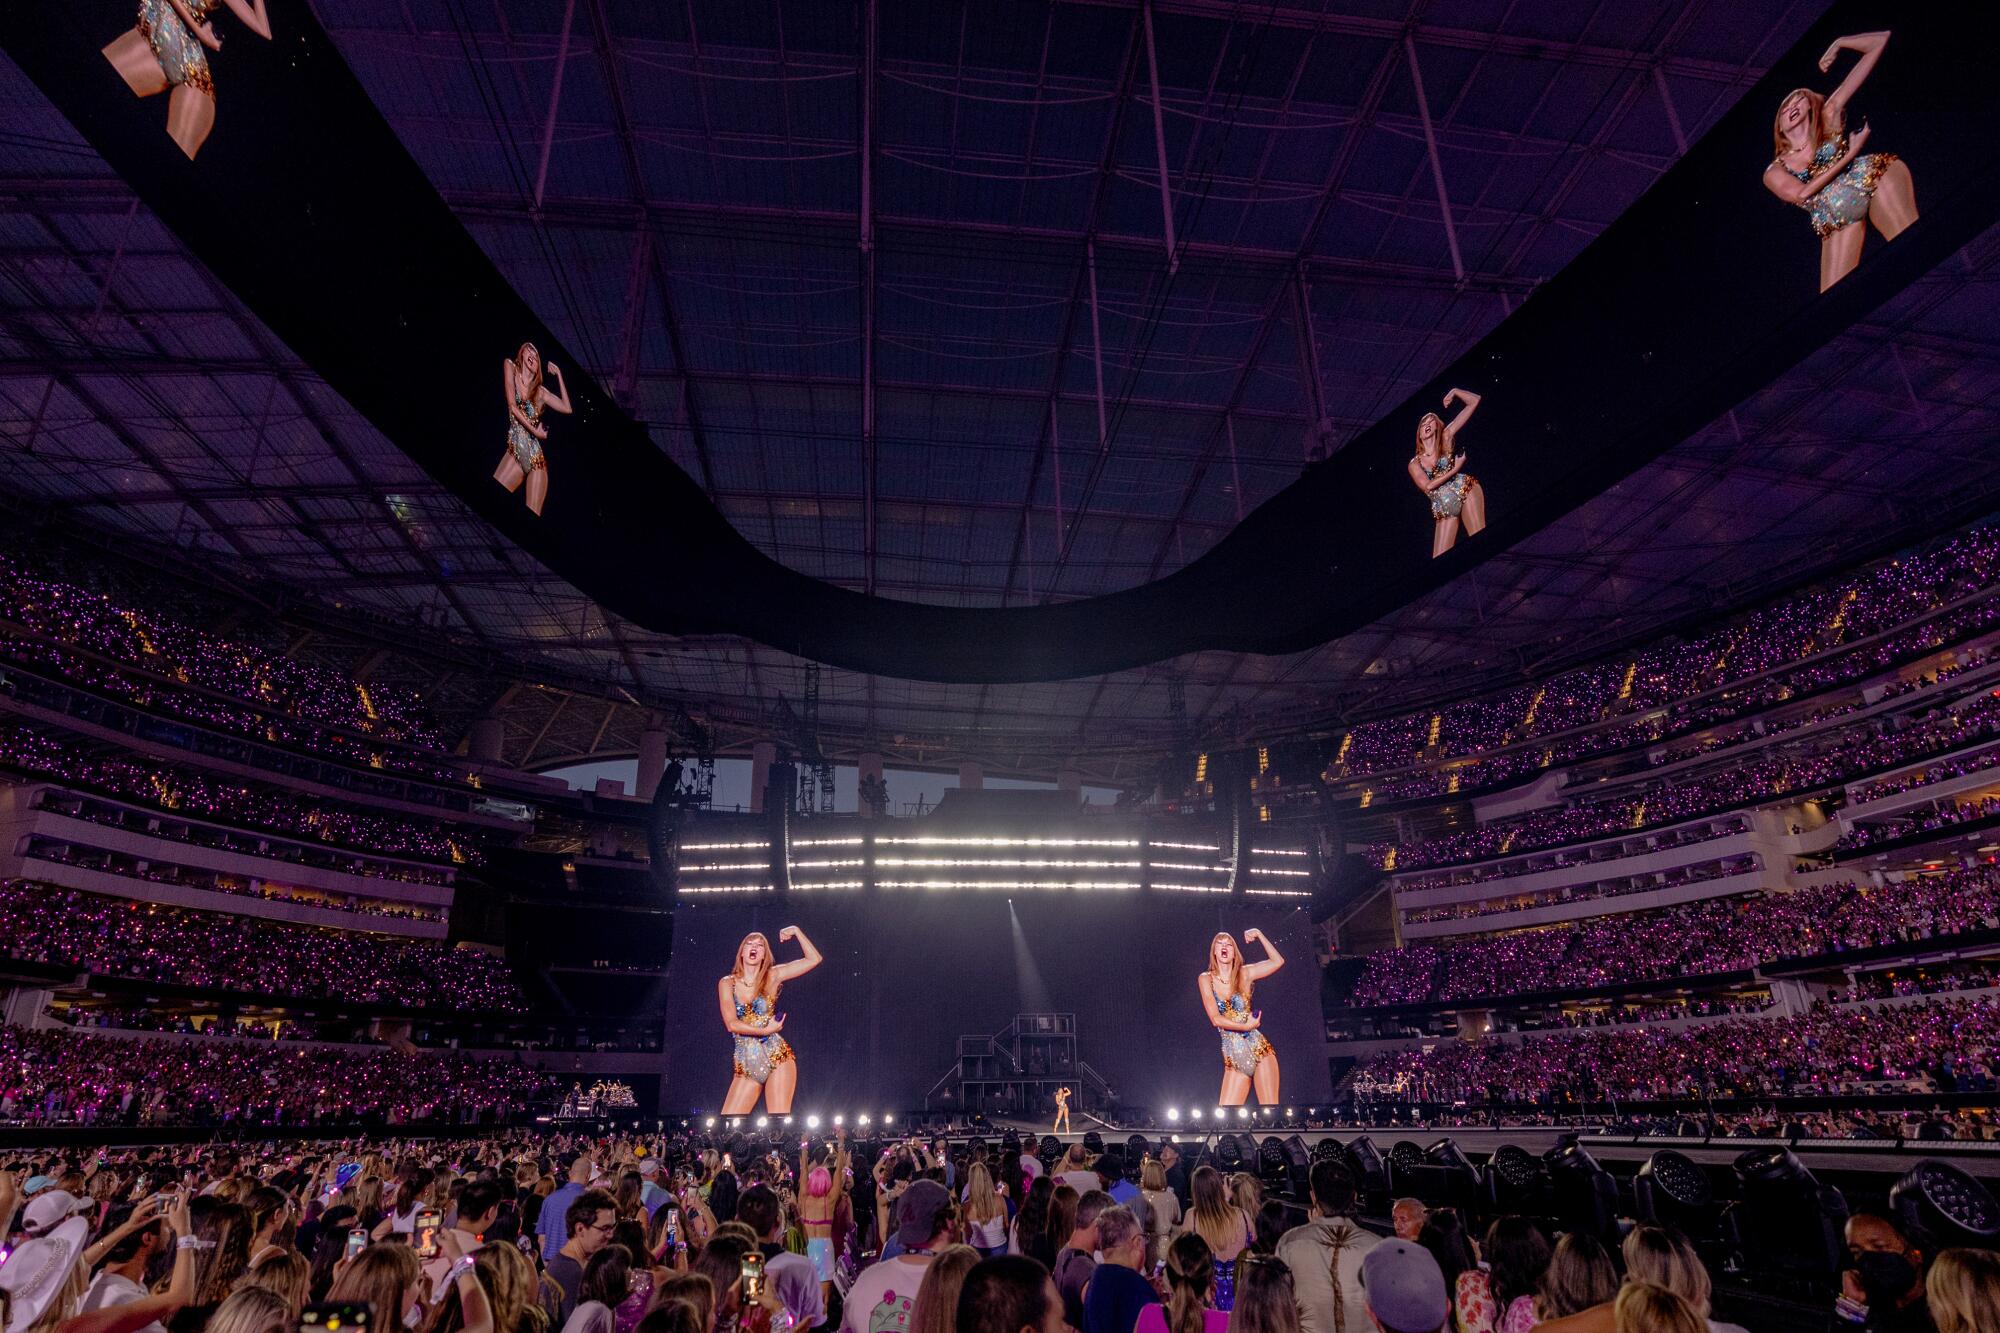 Taylor Swift performs while images of her are projected on big screens in a stadium.